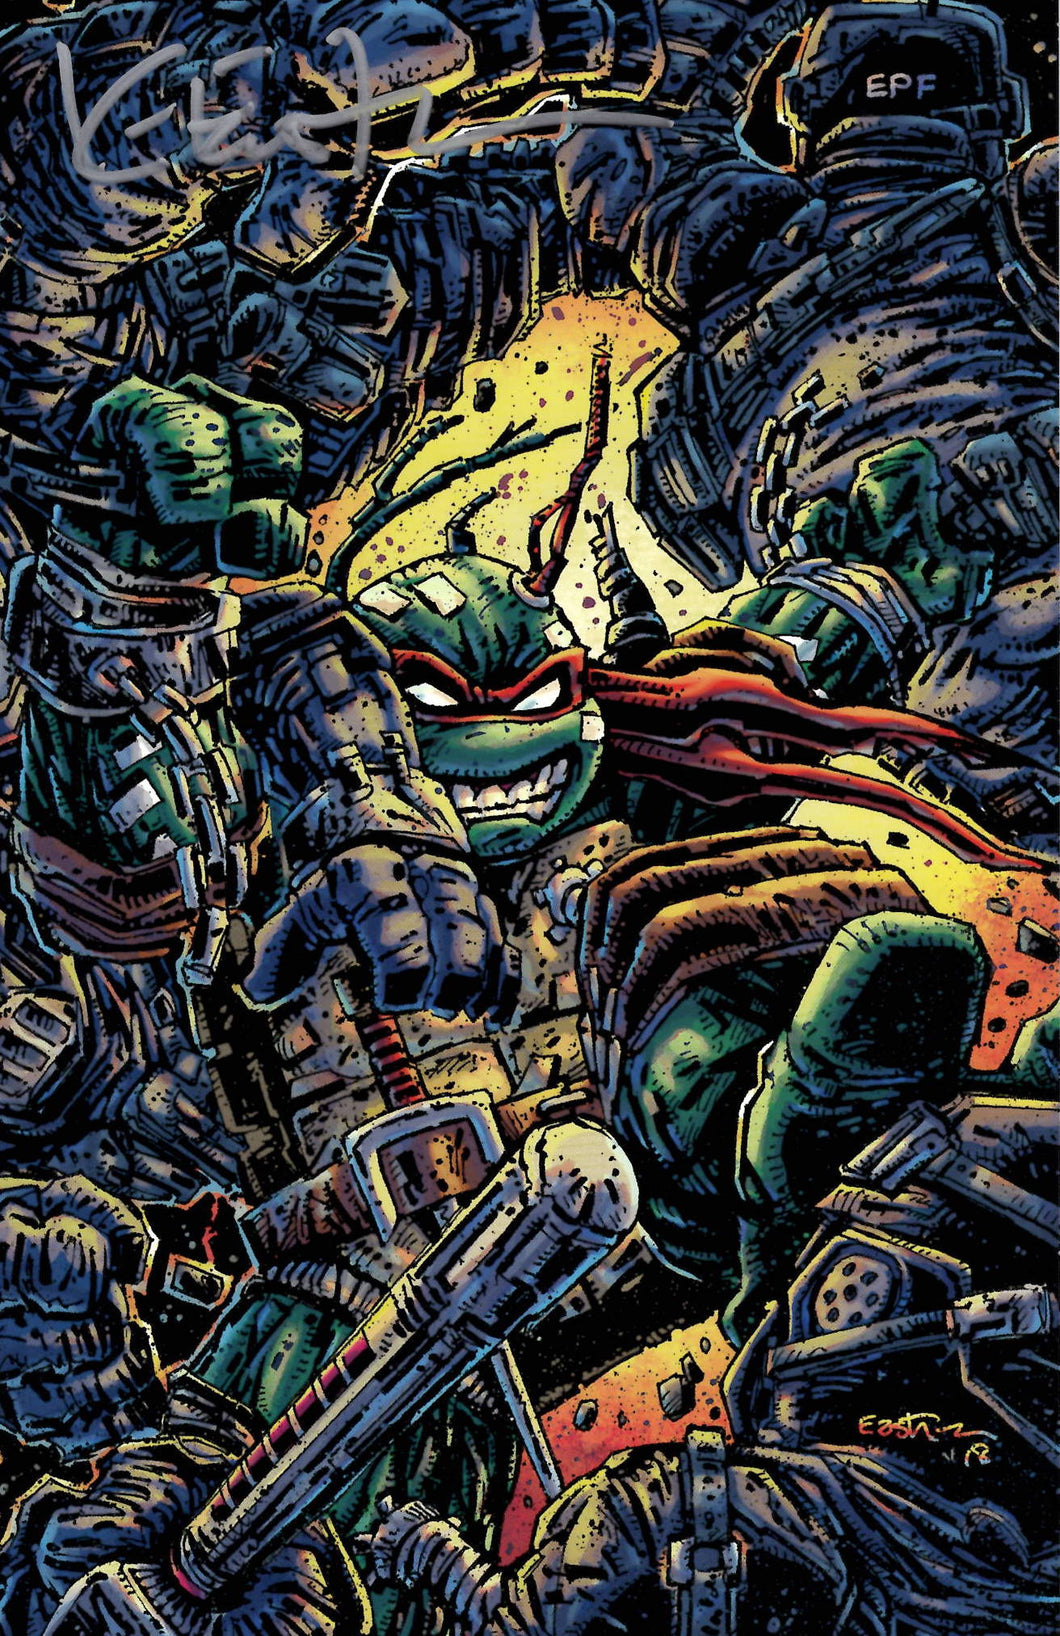 TMNT MACROSERIES #4 – EASTMAN STUDIOS EXCLUSIVE GLOSS FINISHED VARIANT – JUST 500 PRINTED SIGNED BY KEVIN